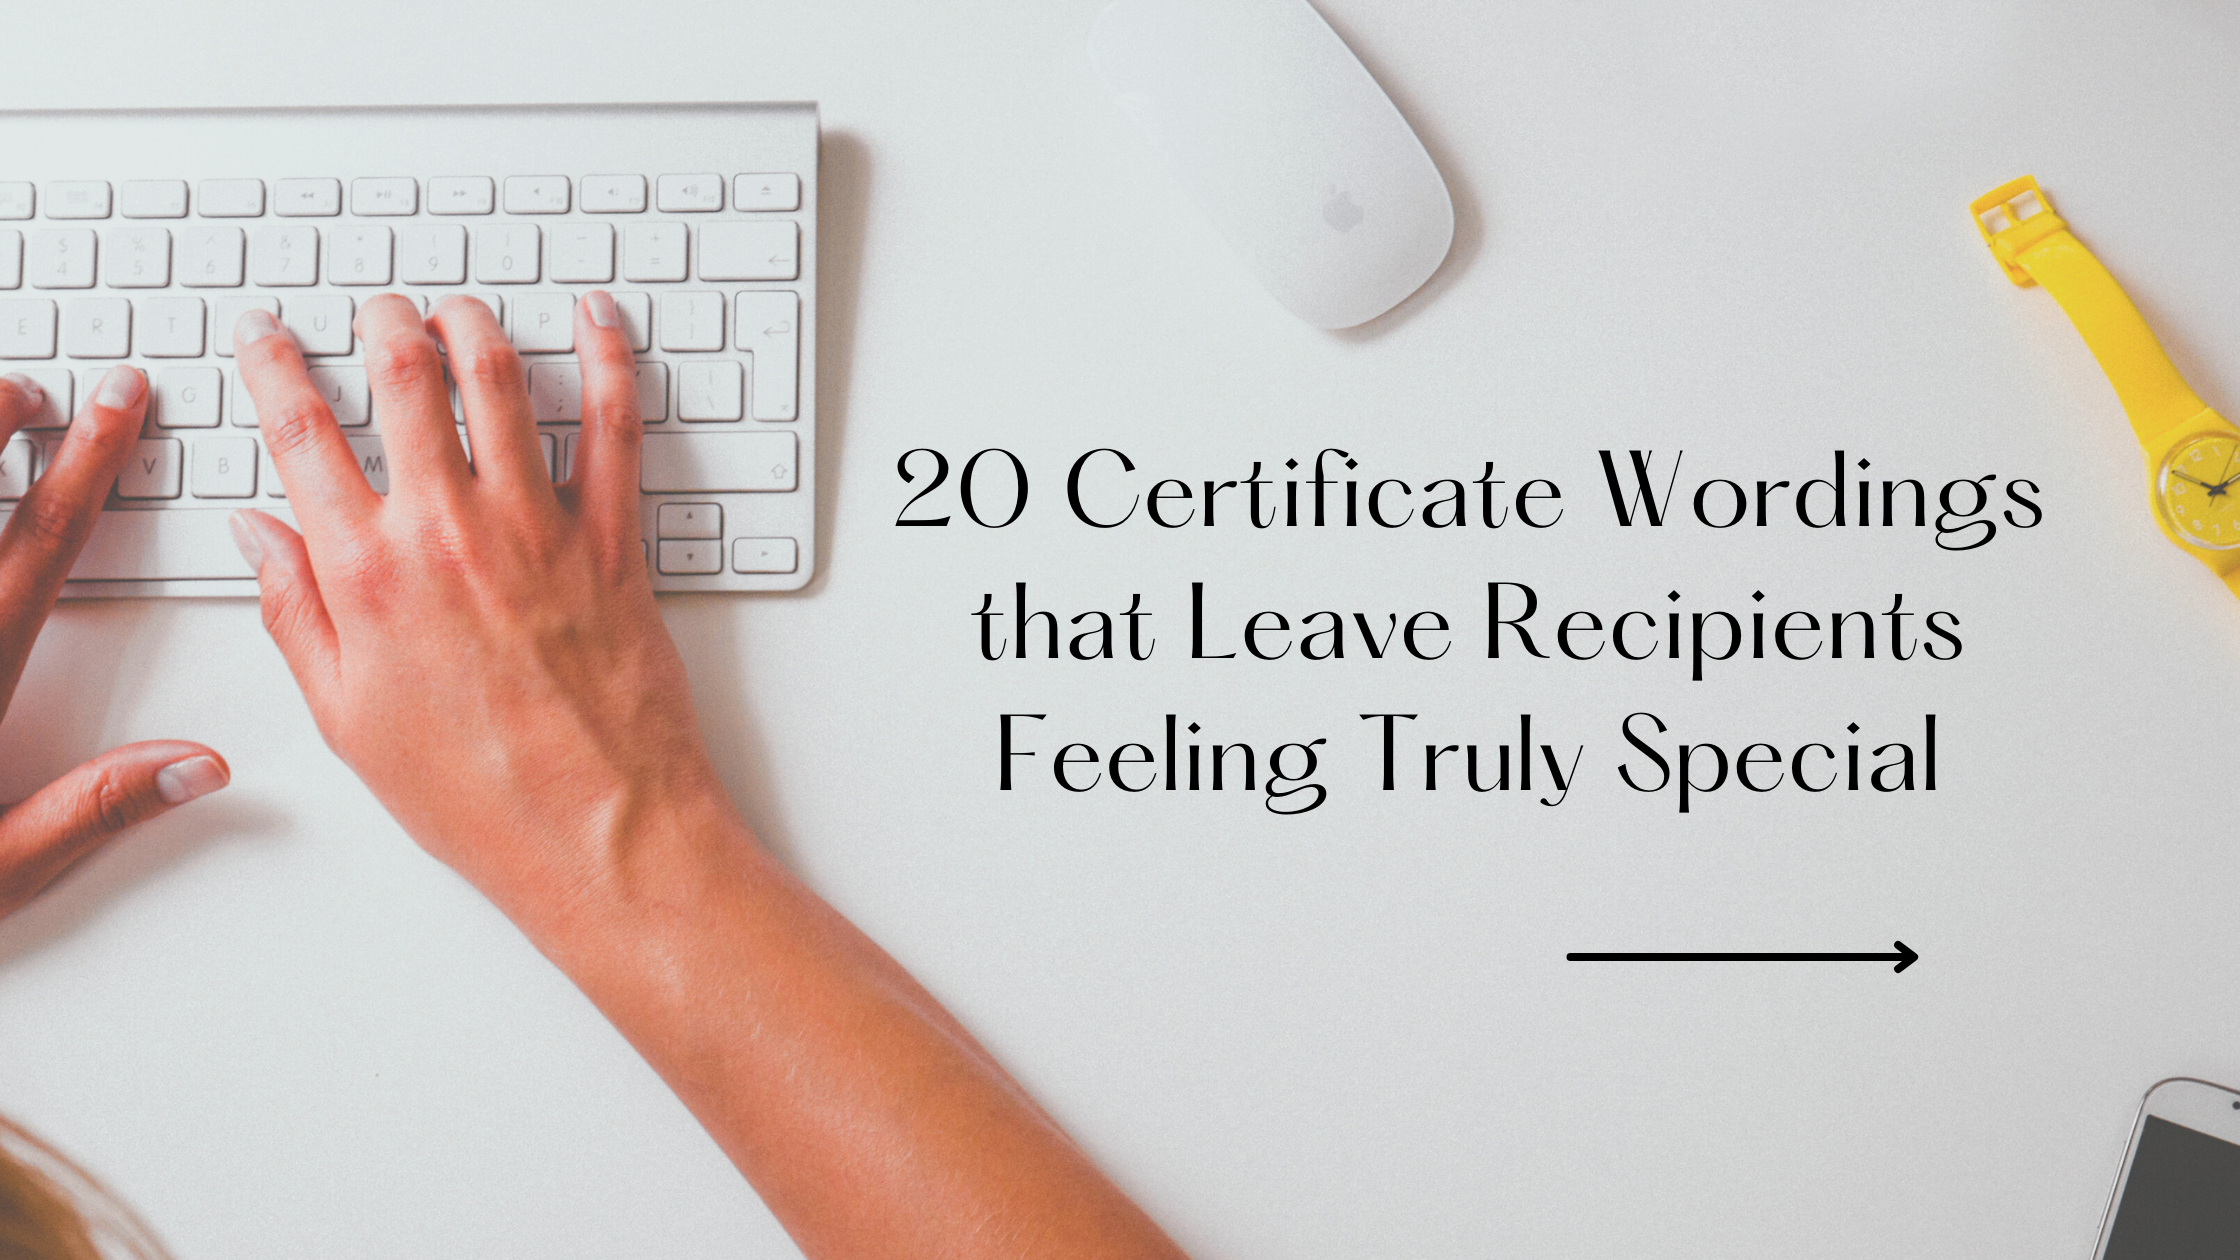 20 Certificate Wordings that Leave Recipients Feeling Truly Special